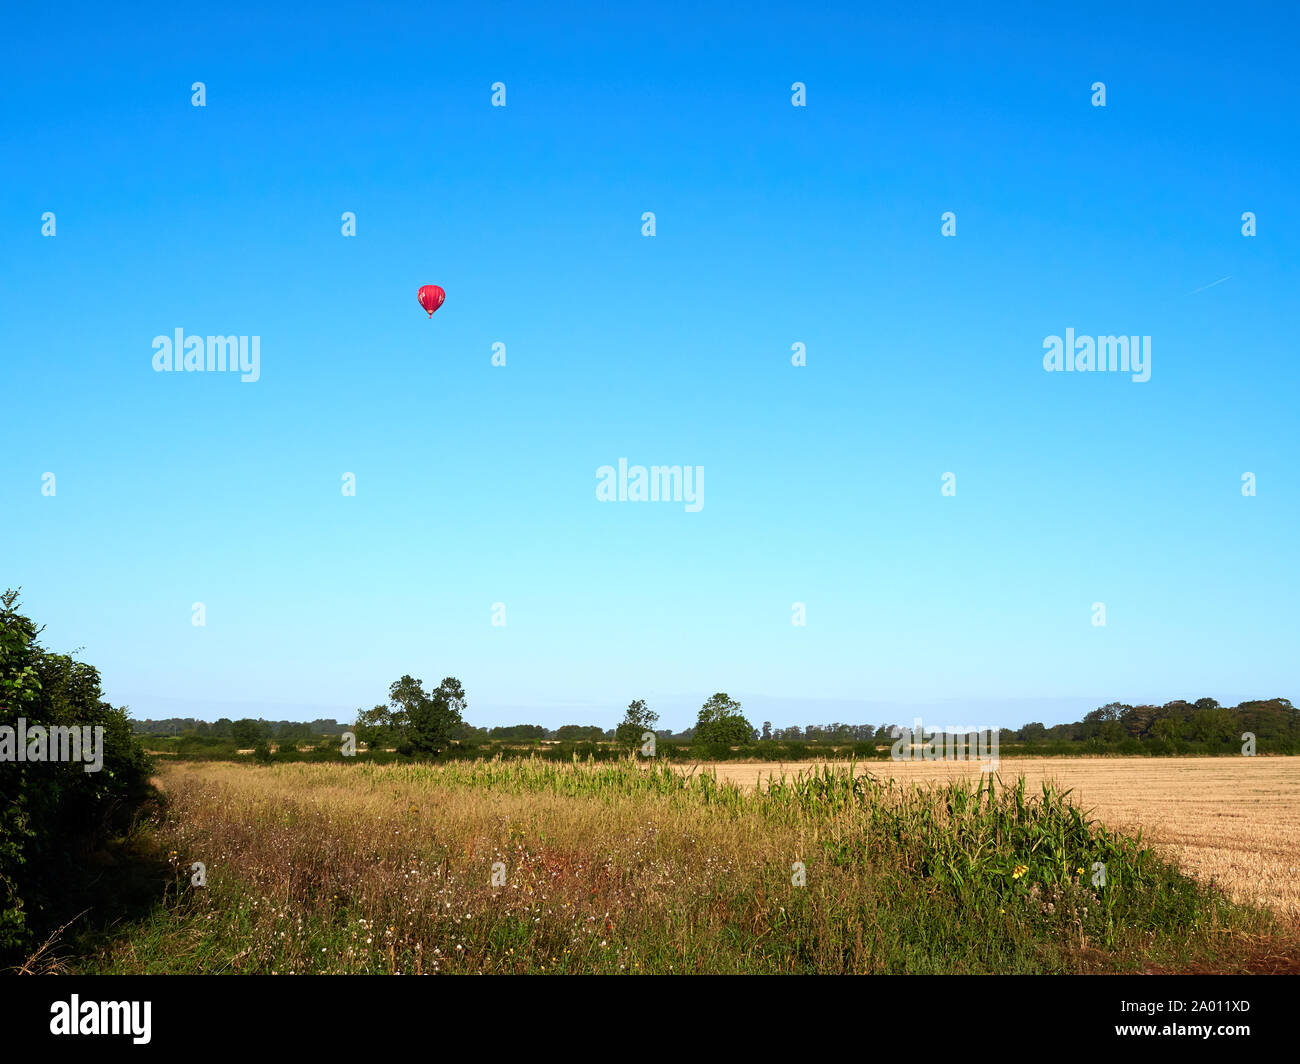 A red hot air balloon over farmland near Grantham in Lincolnshire against the vibrant clear blue sky Stock Photo